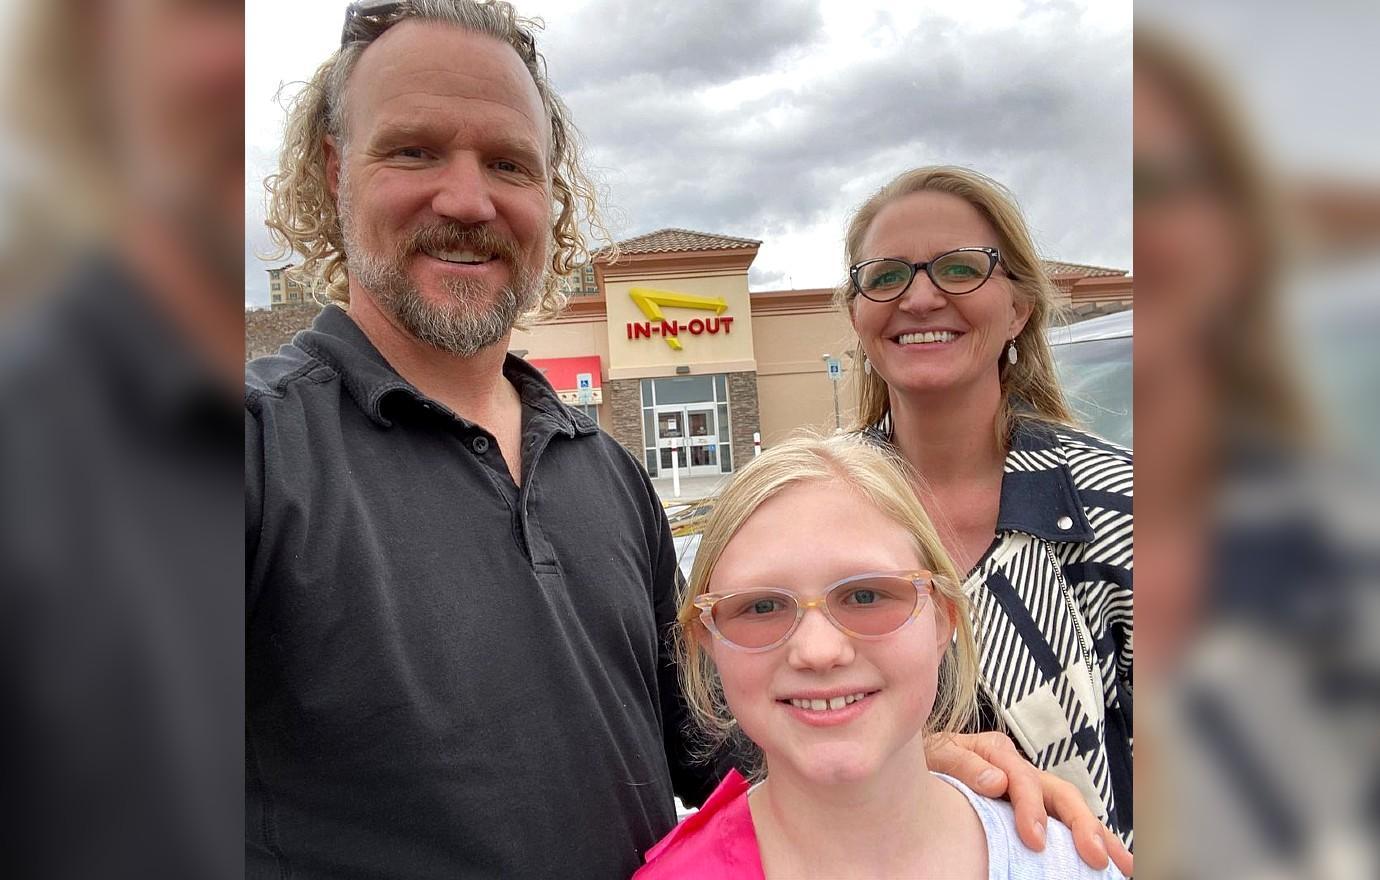 Sister Wives': Hunter Refuses To Let Family Visit Him In Baltimore